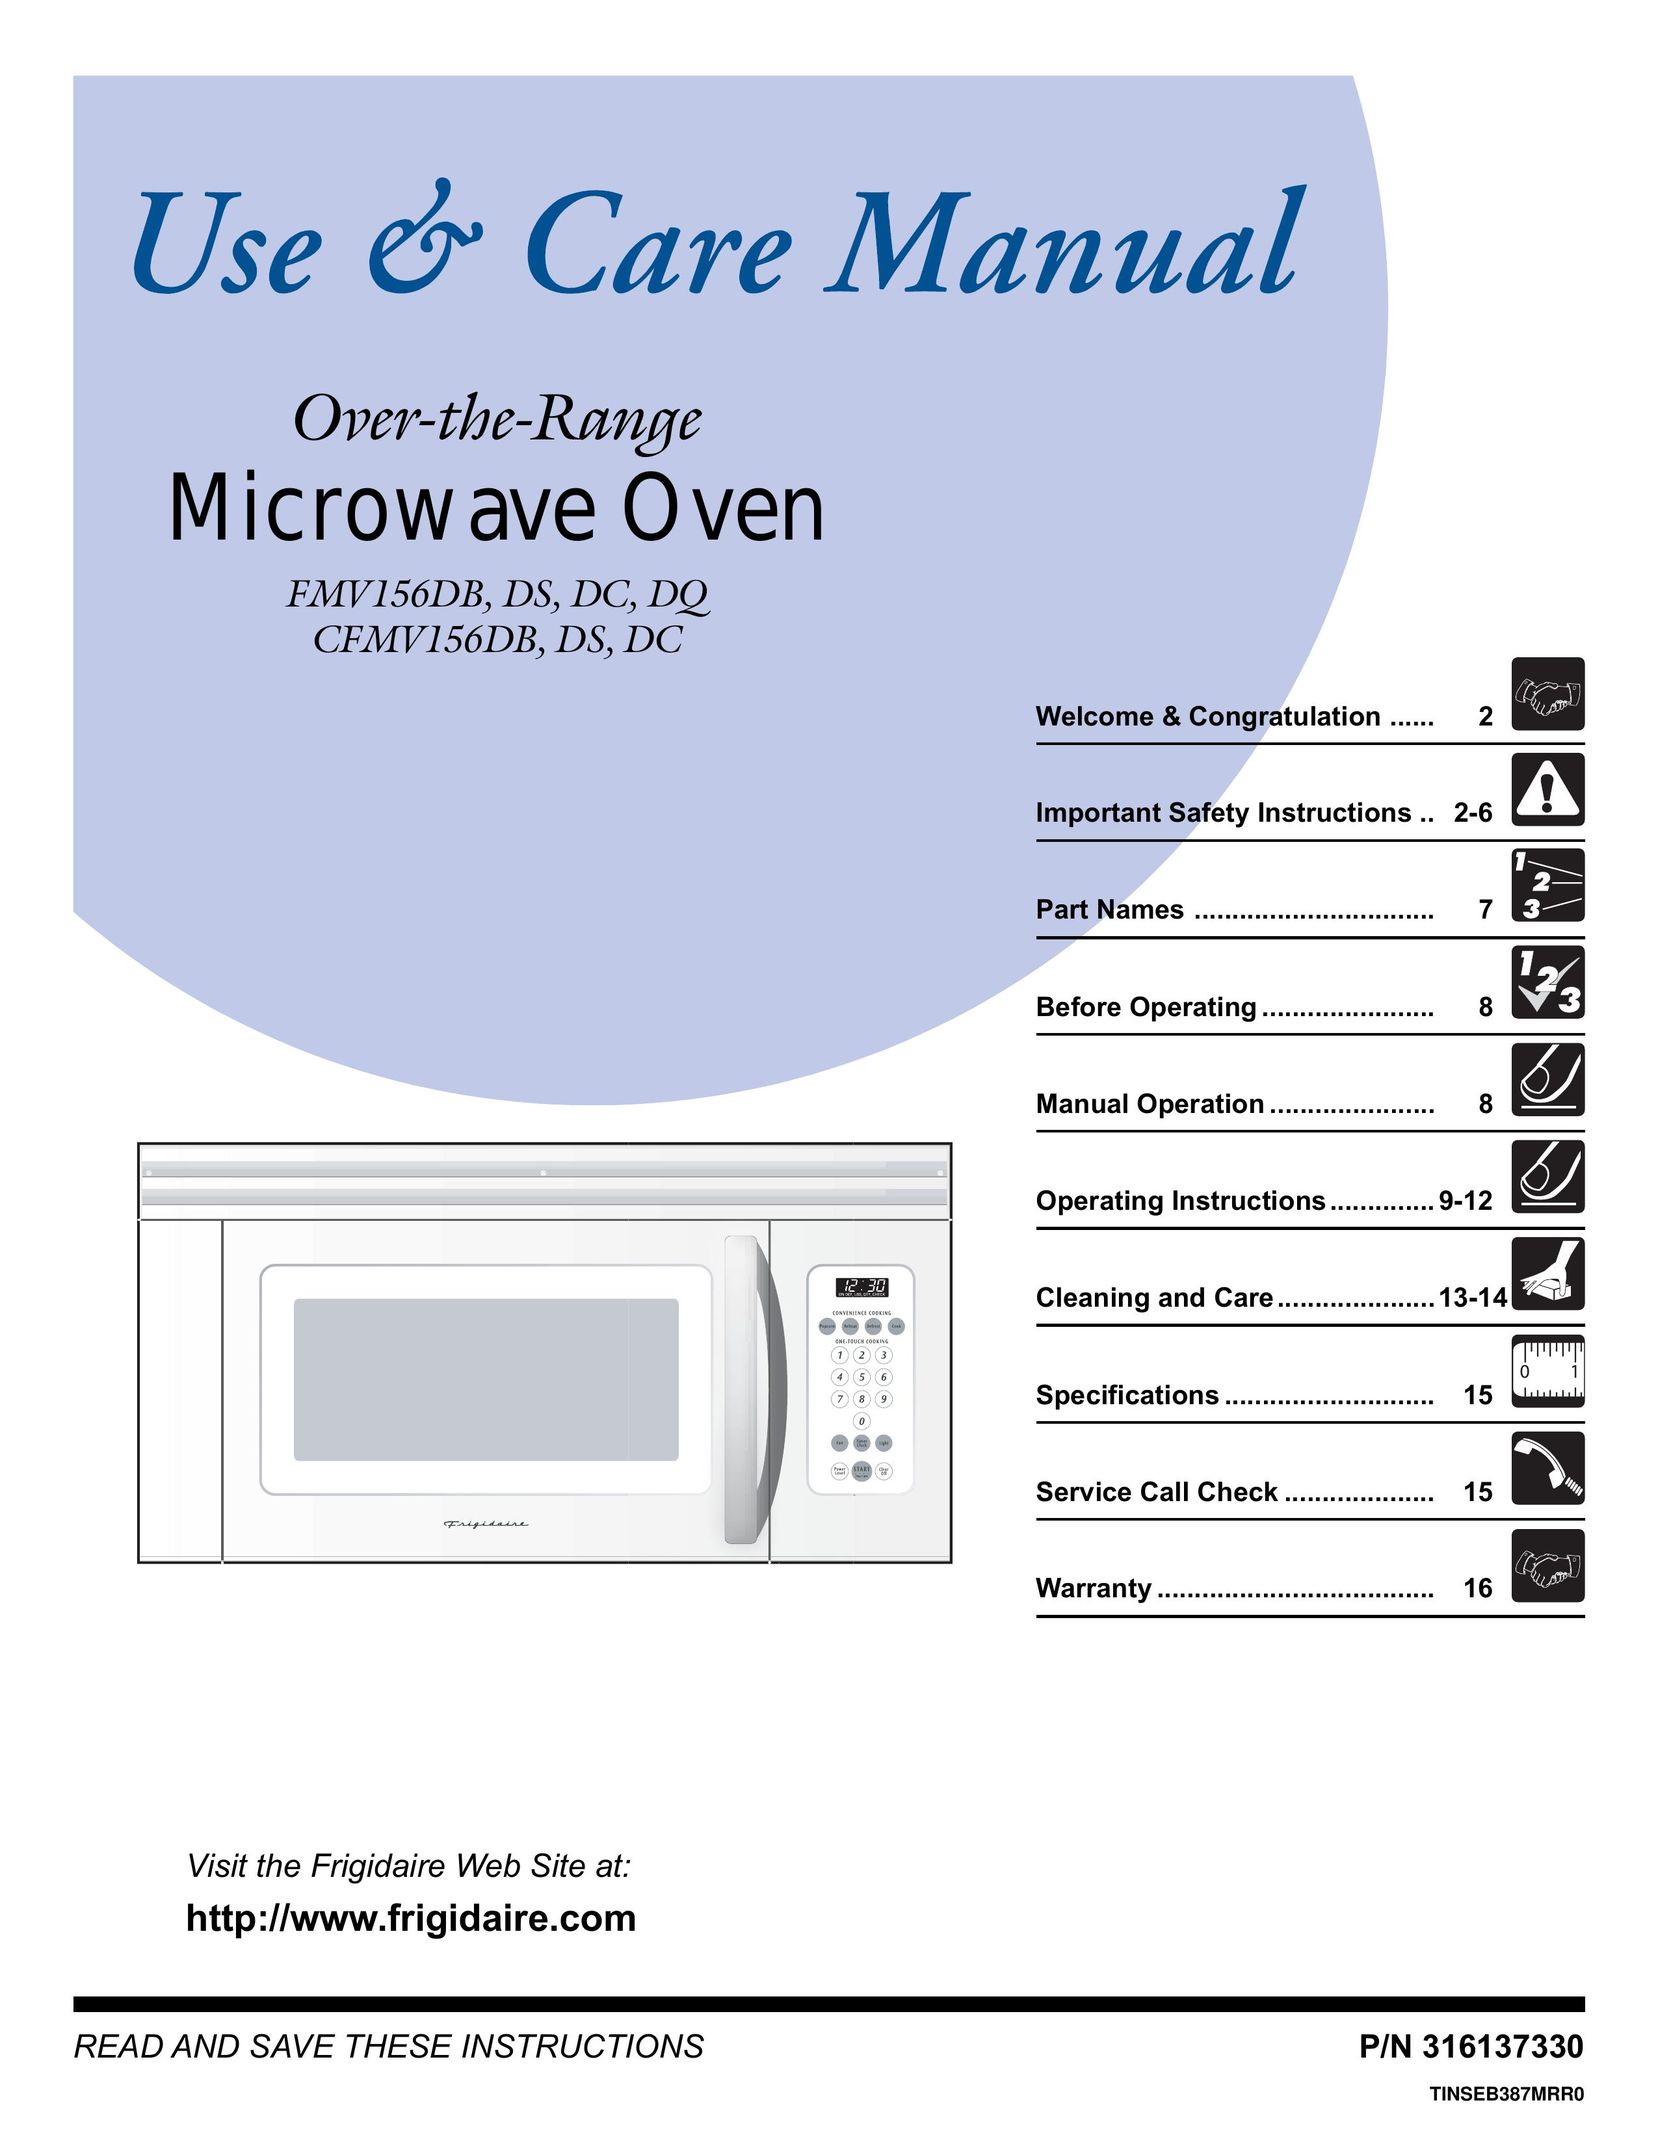 Frigidaire DQ Microwave Oven User Manual